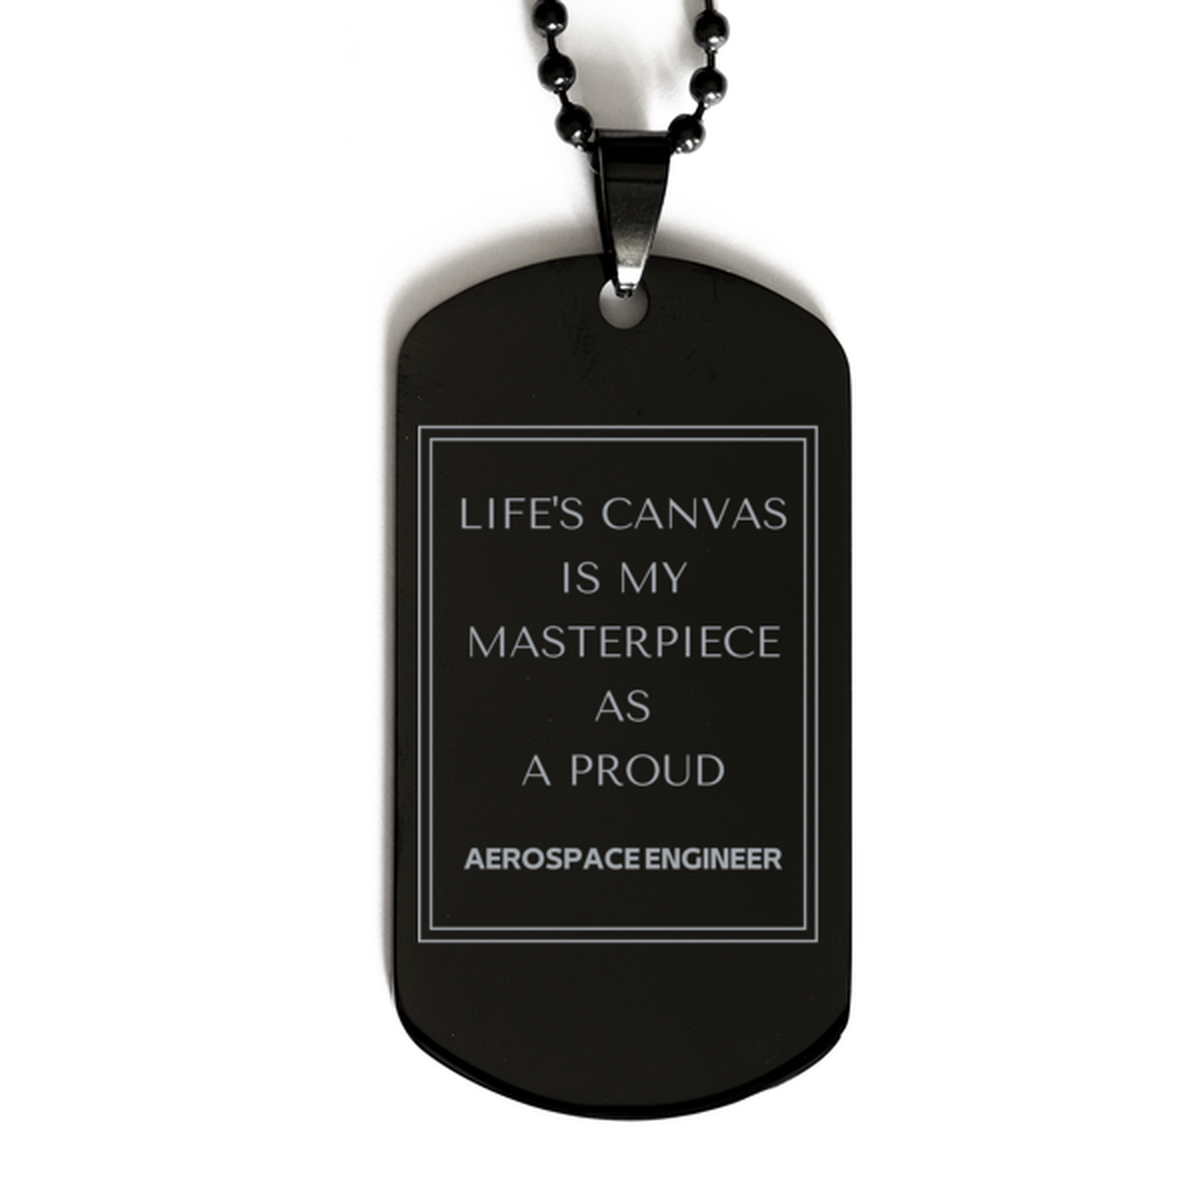 Proud Aerospace Engineer Gifts, Life's canvas is my masterpiece, Epic Birthday Christmas Unique Black Dog Tag For Aerospace Engineer, Coworkers, Men, Women, Friends